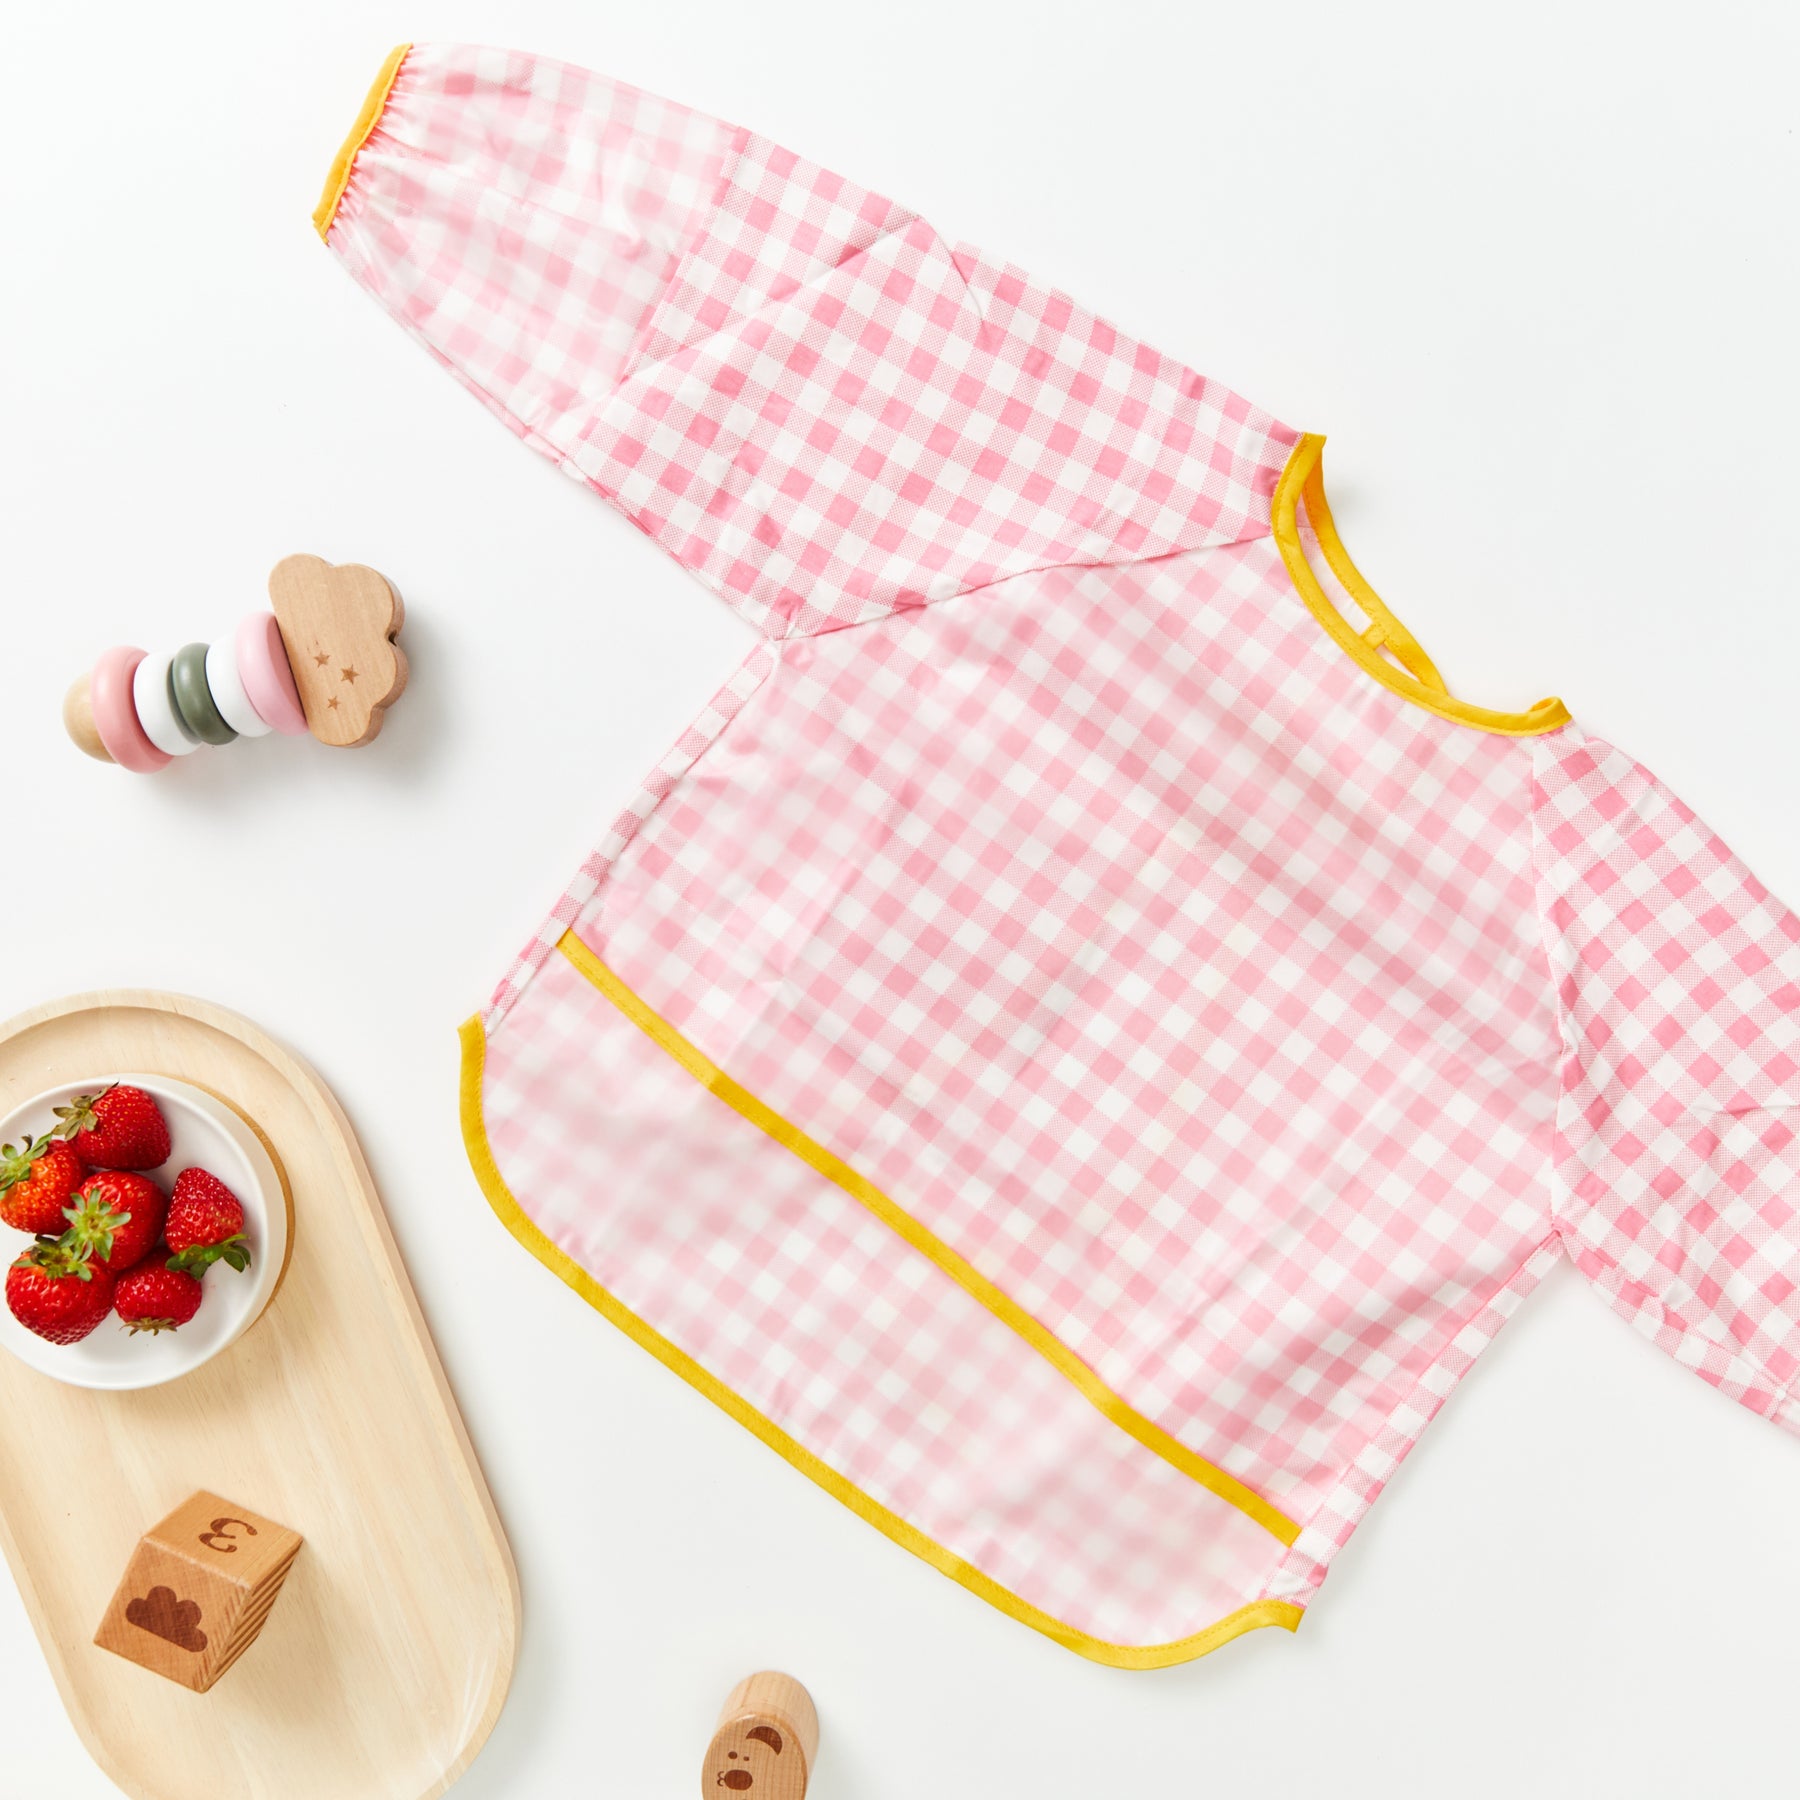 Discover the Many Uses of a Baby Smock: Meals, Arts and Crafts, and Water Play with Sommerfugl Kids' Best-Selling Designs